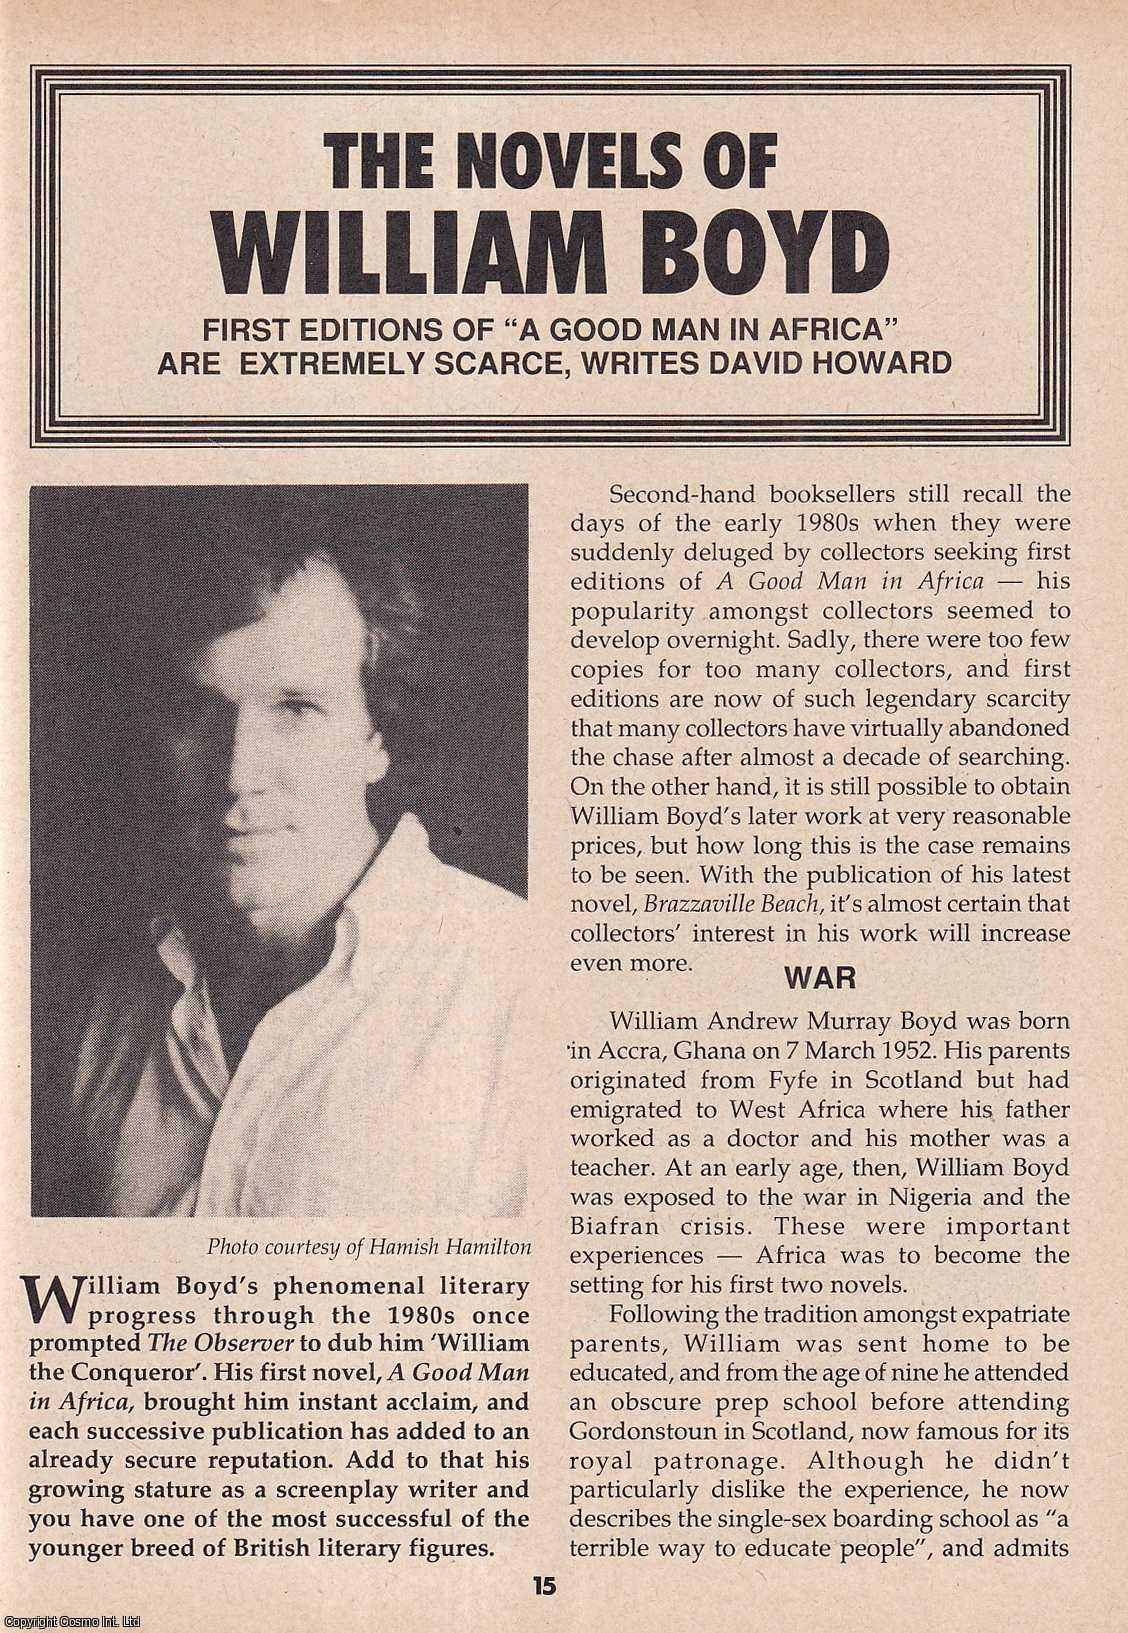 David Howard - The Novels of William Boyd. This is an original article separated from an issue of The Book & Magazine Collector publication, 1990.